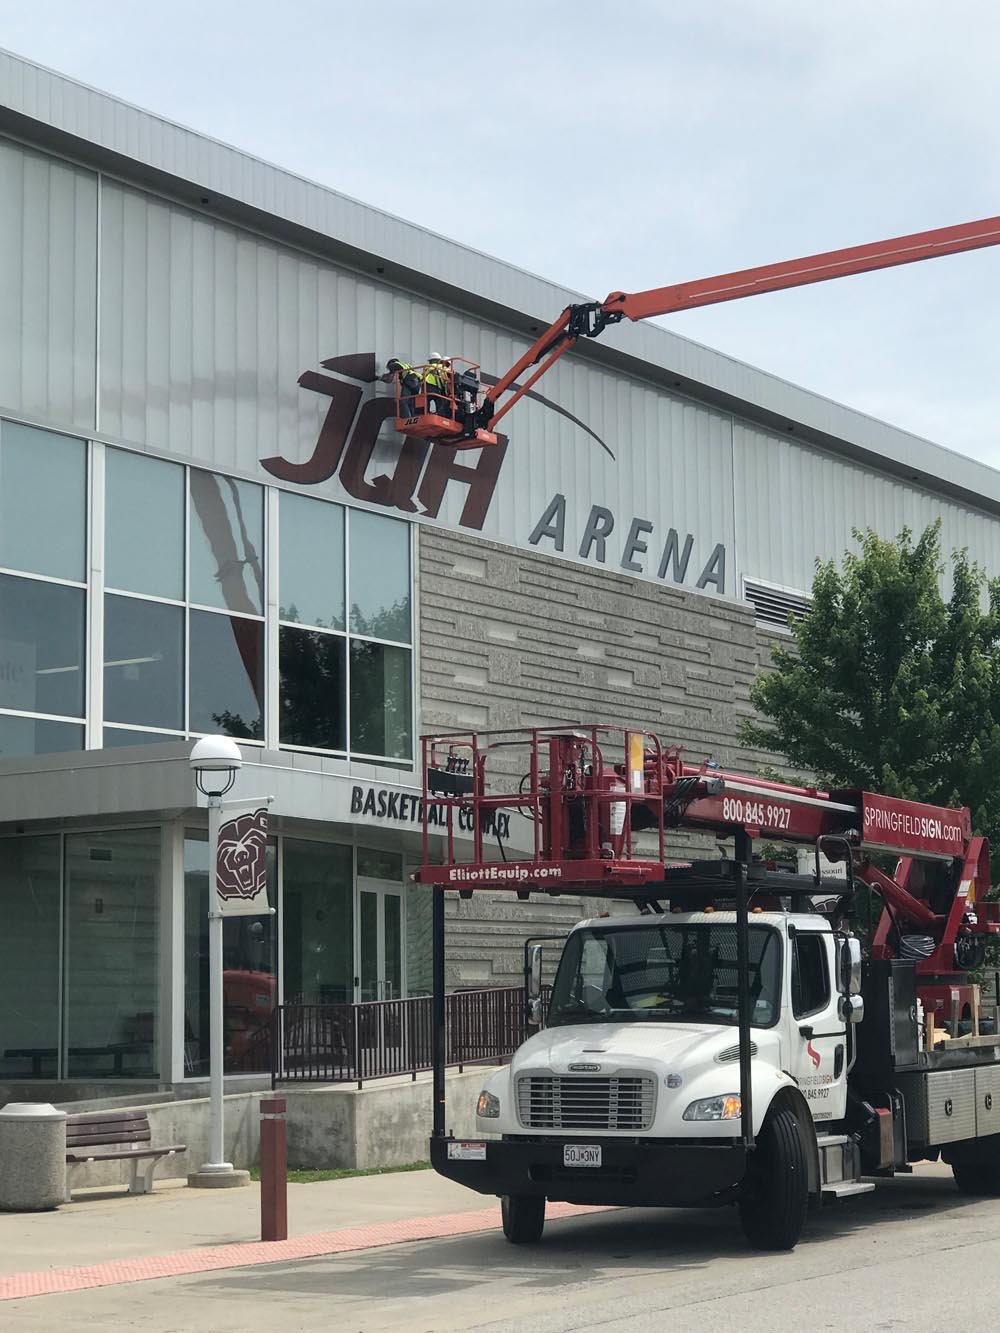 JQH Down
Springfield Sign crews June 3 remove the JQH lettering from Missouri State University’s campus arena. School officials days earlier announced the plan to take down signage representing John Q. Hammons’ defunct naming rights deal. Prior to his death in 2013, Hammons had pledged $30 million toward the $67 million arena. In bankruptcy court proceedings last year, Hammons’ assets went to JD Holdings LLC and officials there agreed to pay MSU $10 million to walk away from the deal. Officials estimate the removal process to cost $20,750. The naming rights are now available.